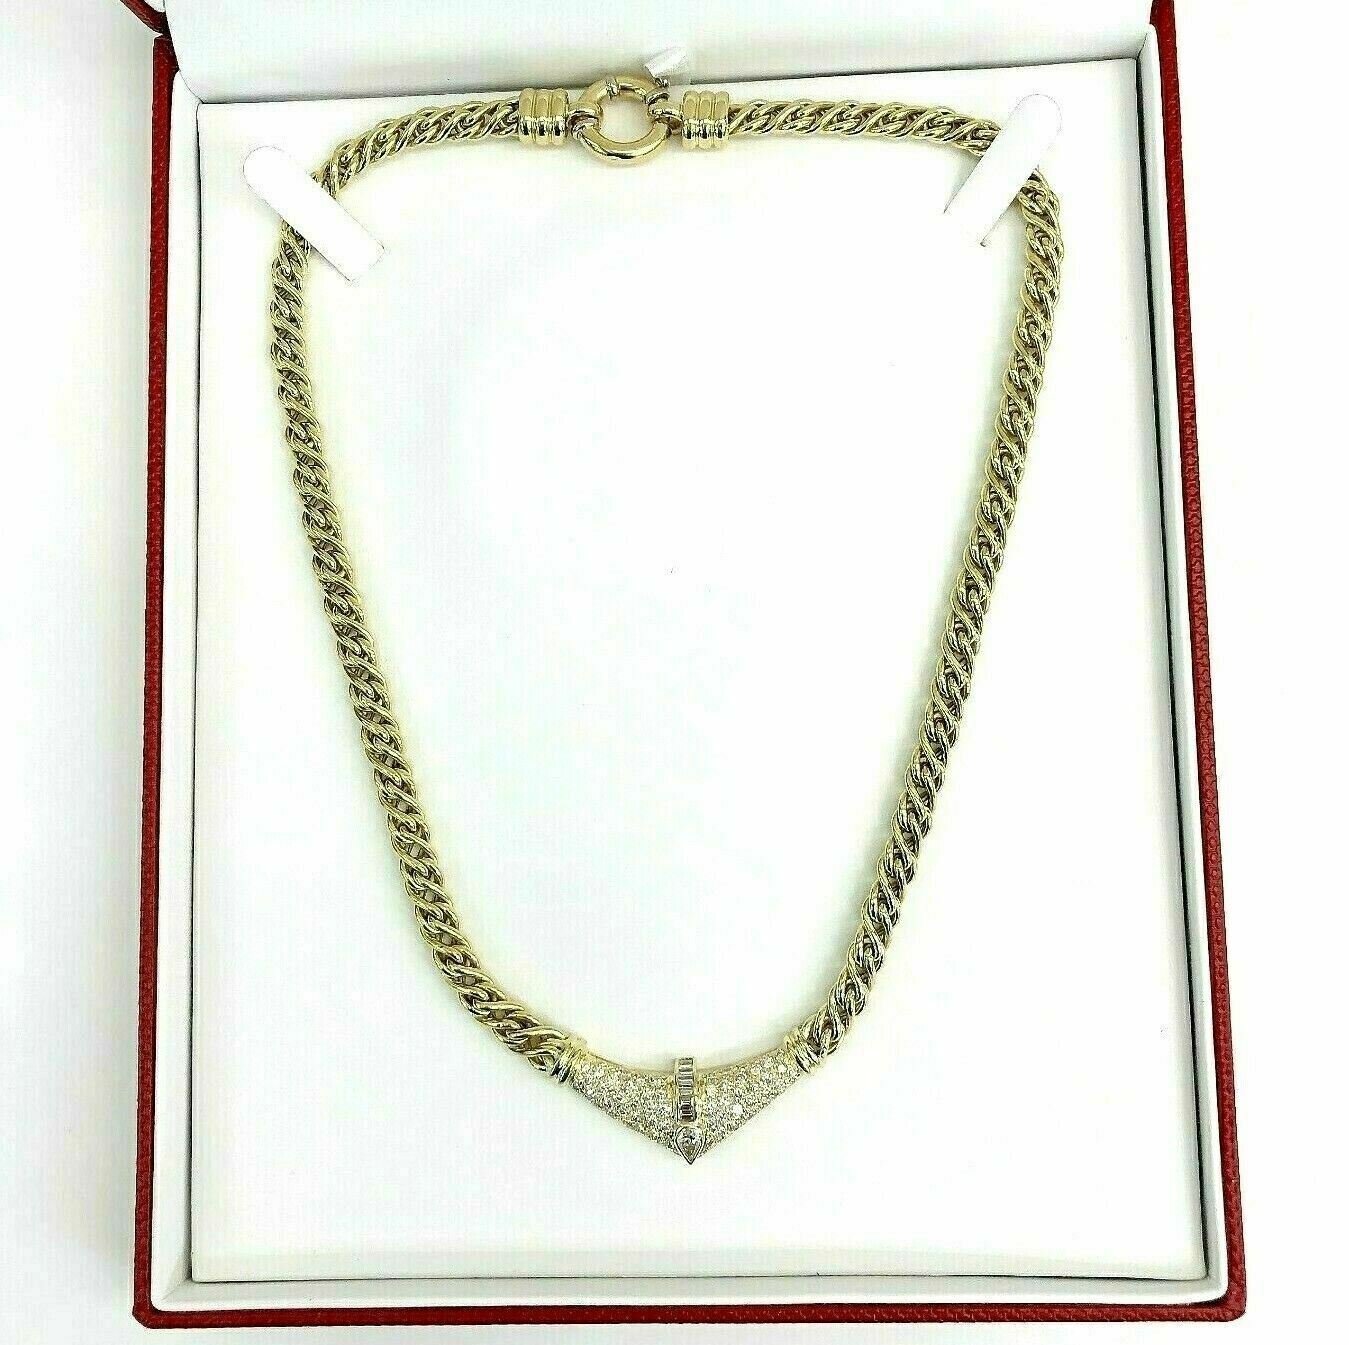 2.25 Carats t.w. Pear Baguette and Round Diamond Dinner Necklace 18K Gold